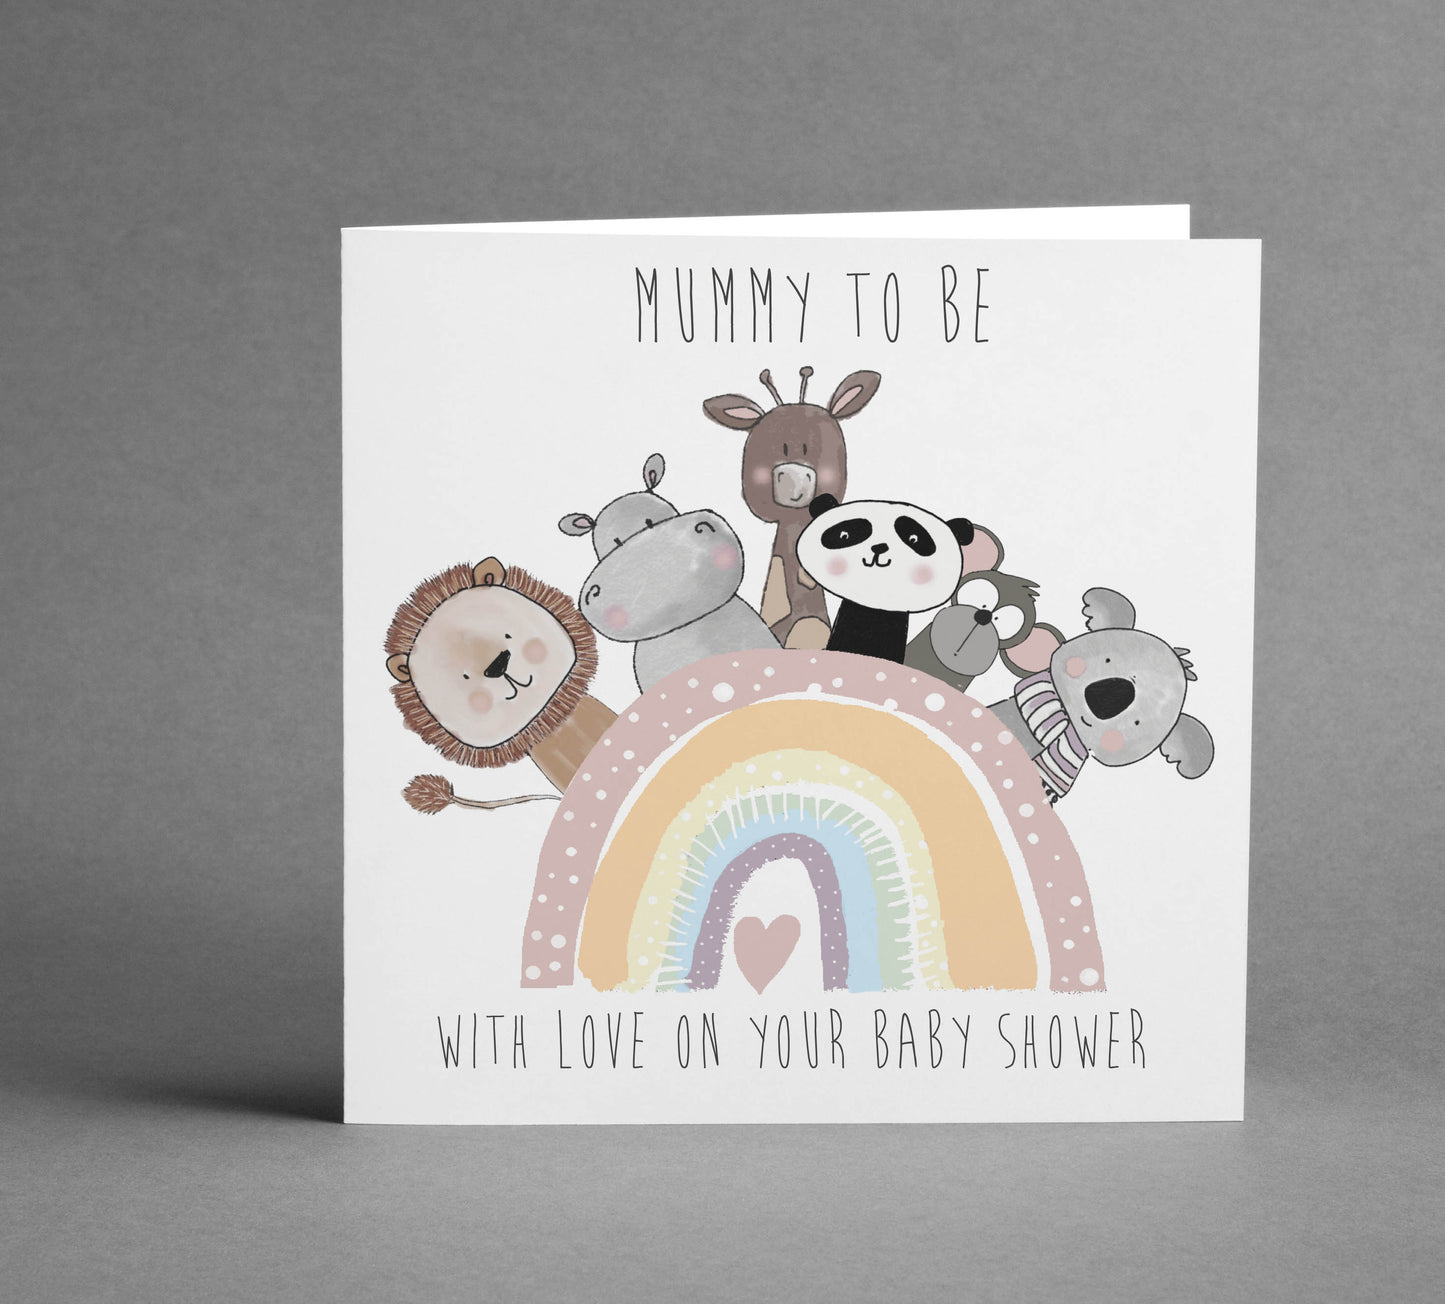 Pastel Rainbow Baby shower Square Card